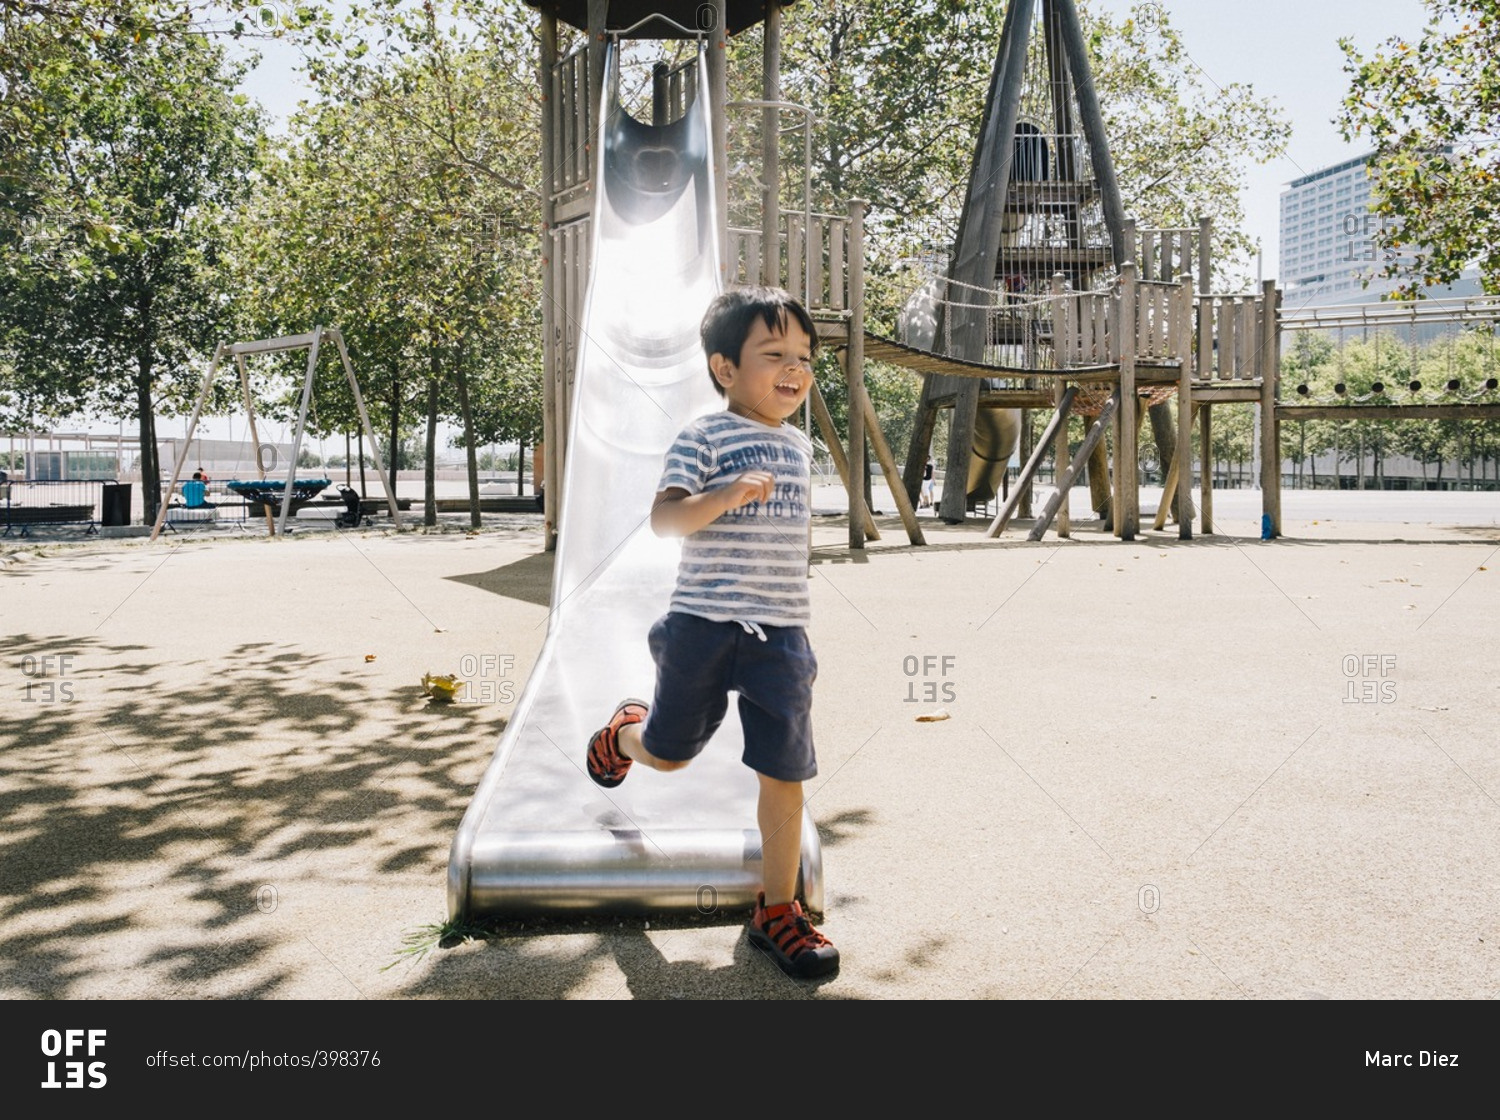 Boy running and laughing in front of a slide on a playground